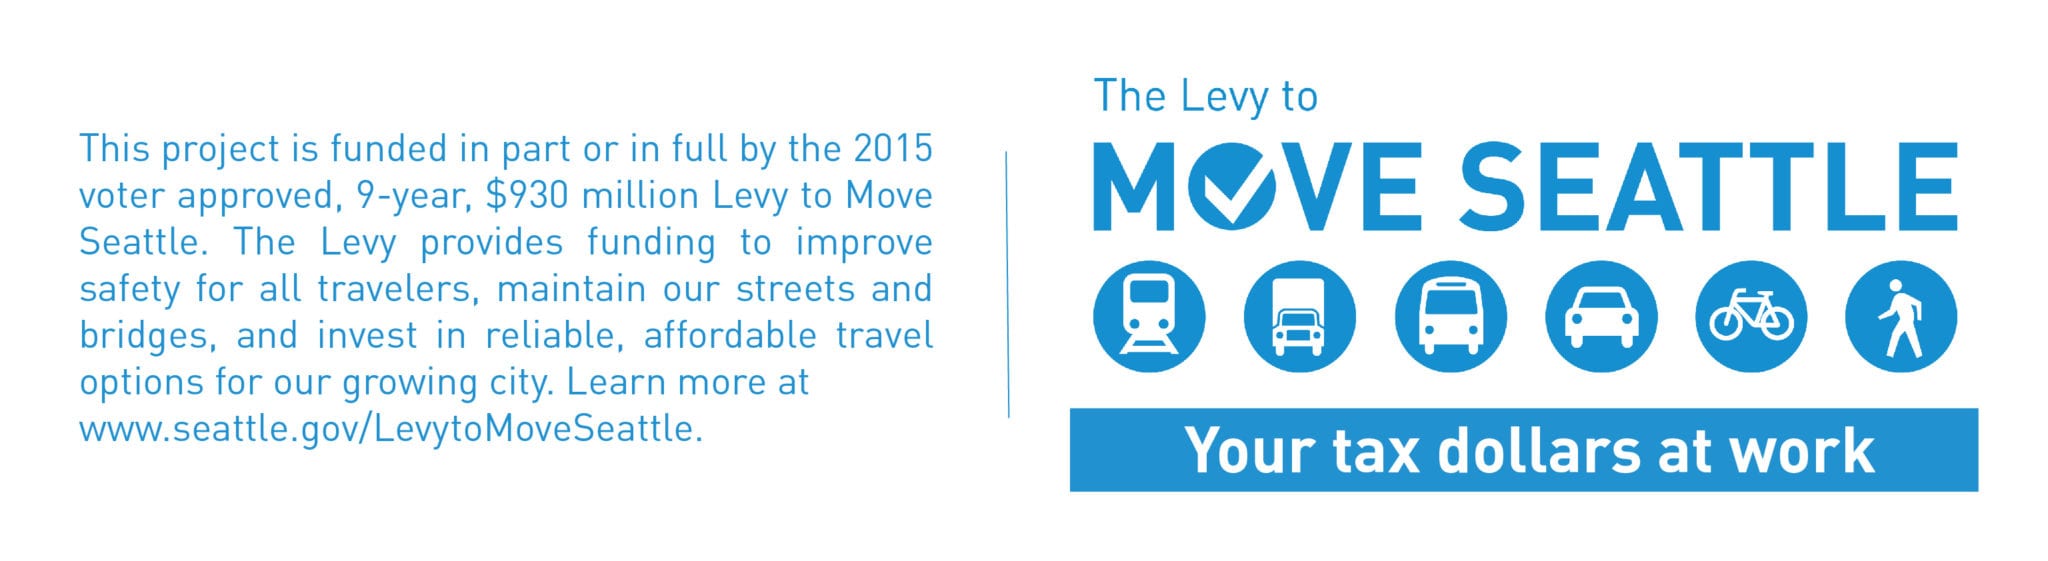 Levy to Move Seattle logo, which reads: "This project is funded in part or in full by the 2015 voter approved 9-year, $930 million Levy to Move Seattle. The Levy provides funding to improve safety for all travelers, maintain our streets and bridges, and invest in reliable, affordable travel options for our growing city. Learn more at www.seattle.gov/LevytoMoveSeattle." On the right, the logo reads: "The Levy to Move Seattle Your tax dollars at work" and has icons showing a streetcar, truck, bus, car, bike, and person walking.